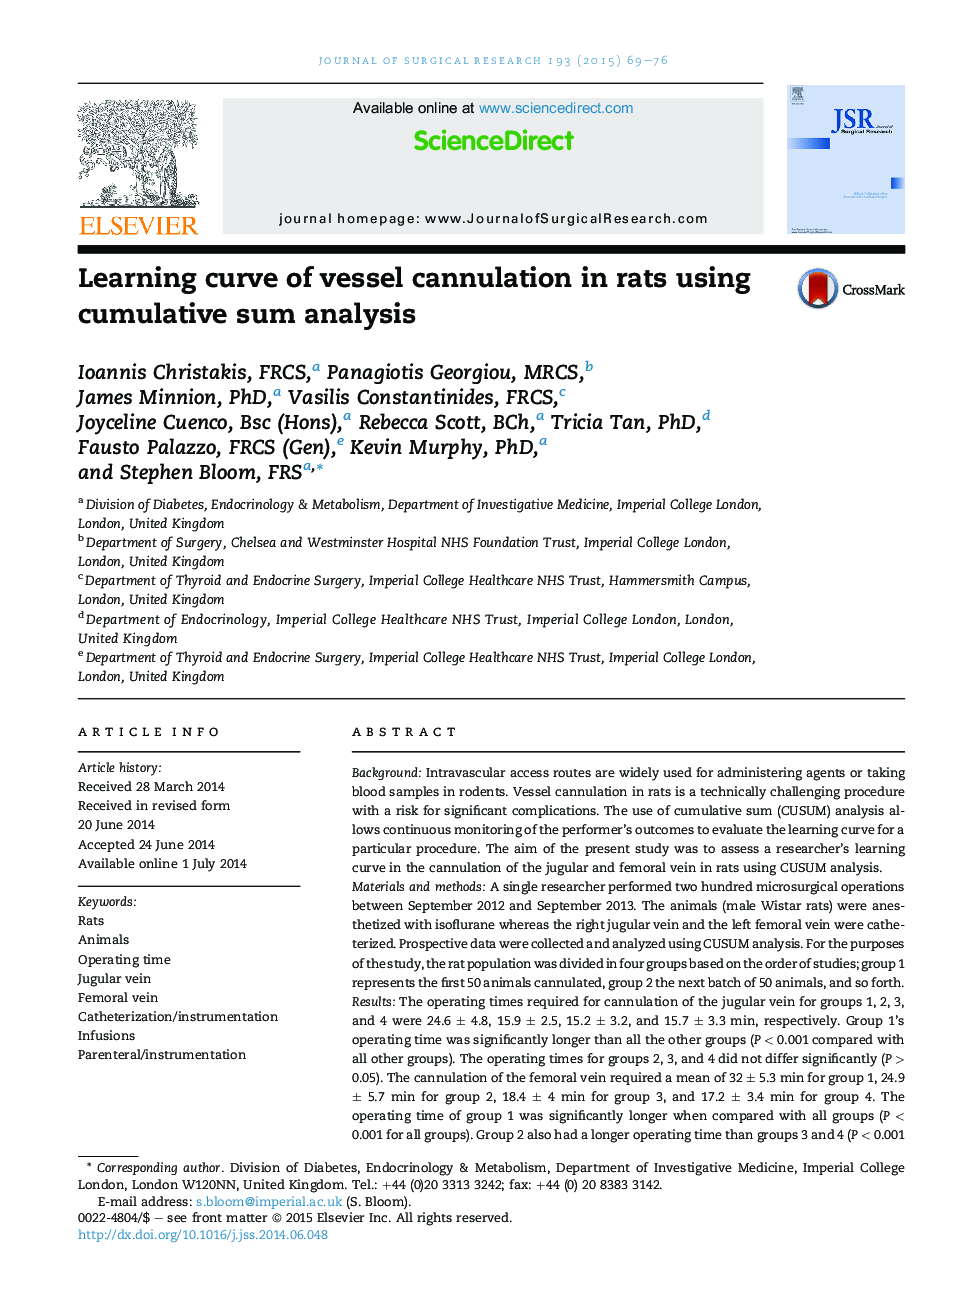 EducationLearning curve of vessel cannulation in rats using cumulative sum analysis